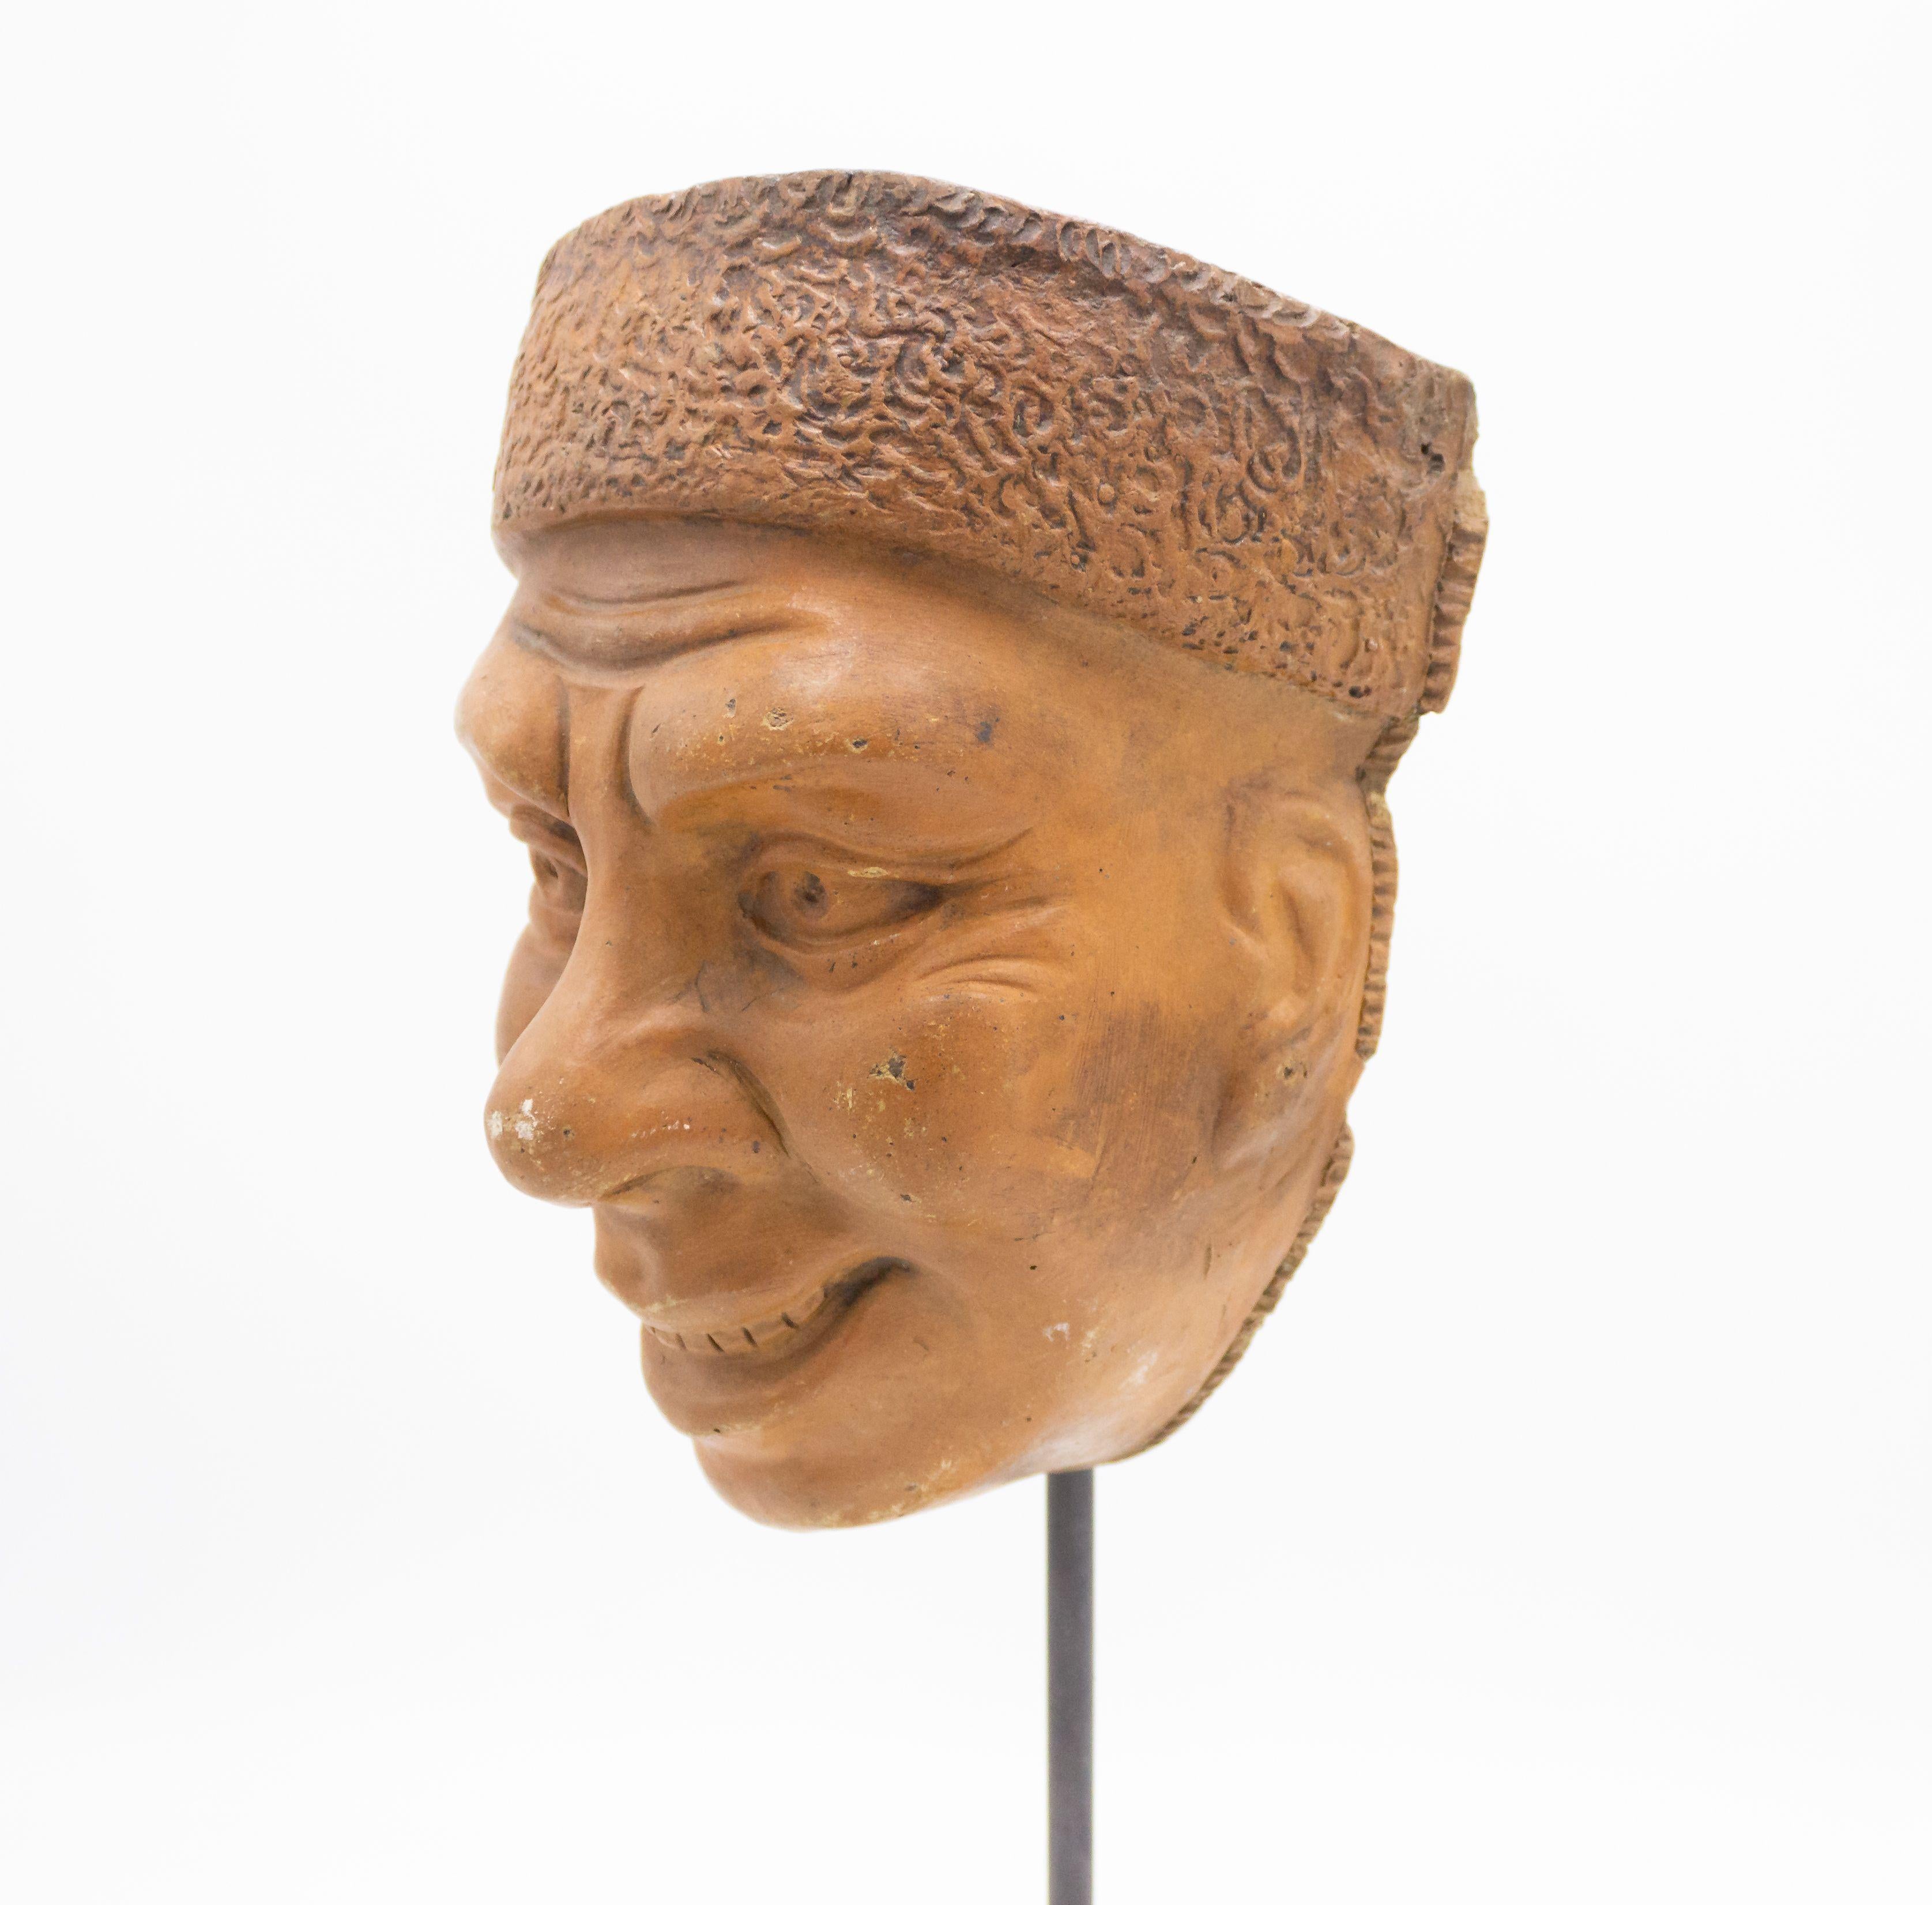 Continental German (late 19th Cent) sculpted terra-cotta master mask mold of a smiling face with a lamb's wool hat displayed on a square black marble base Stand (part of a collection).
  